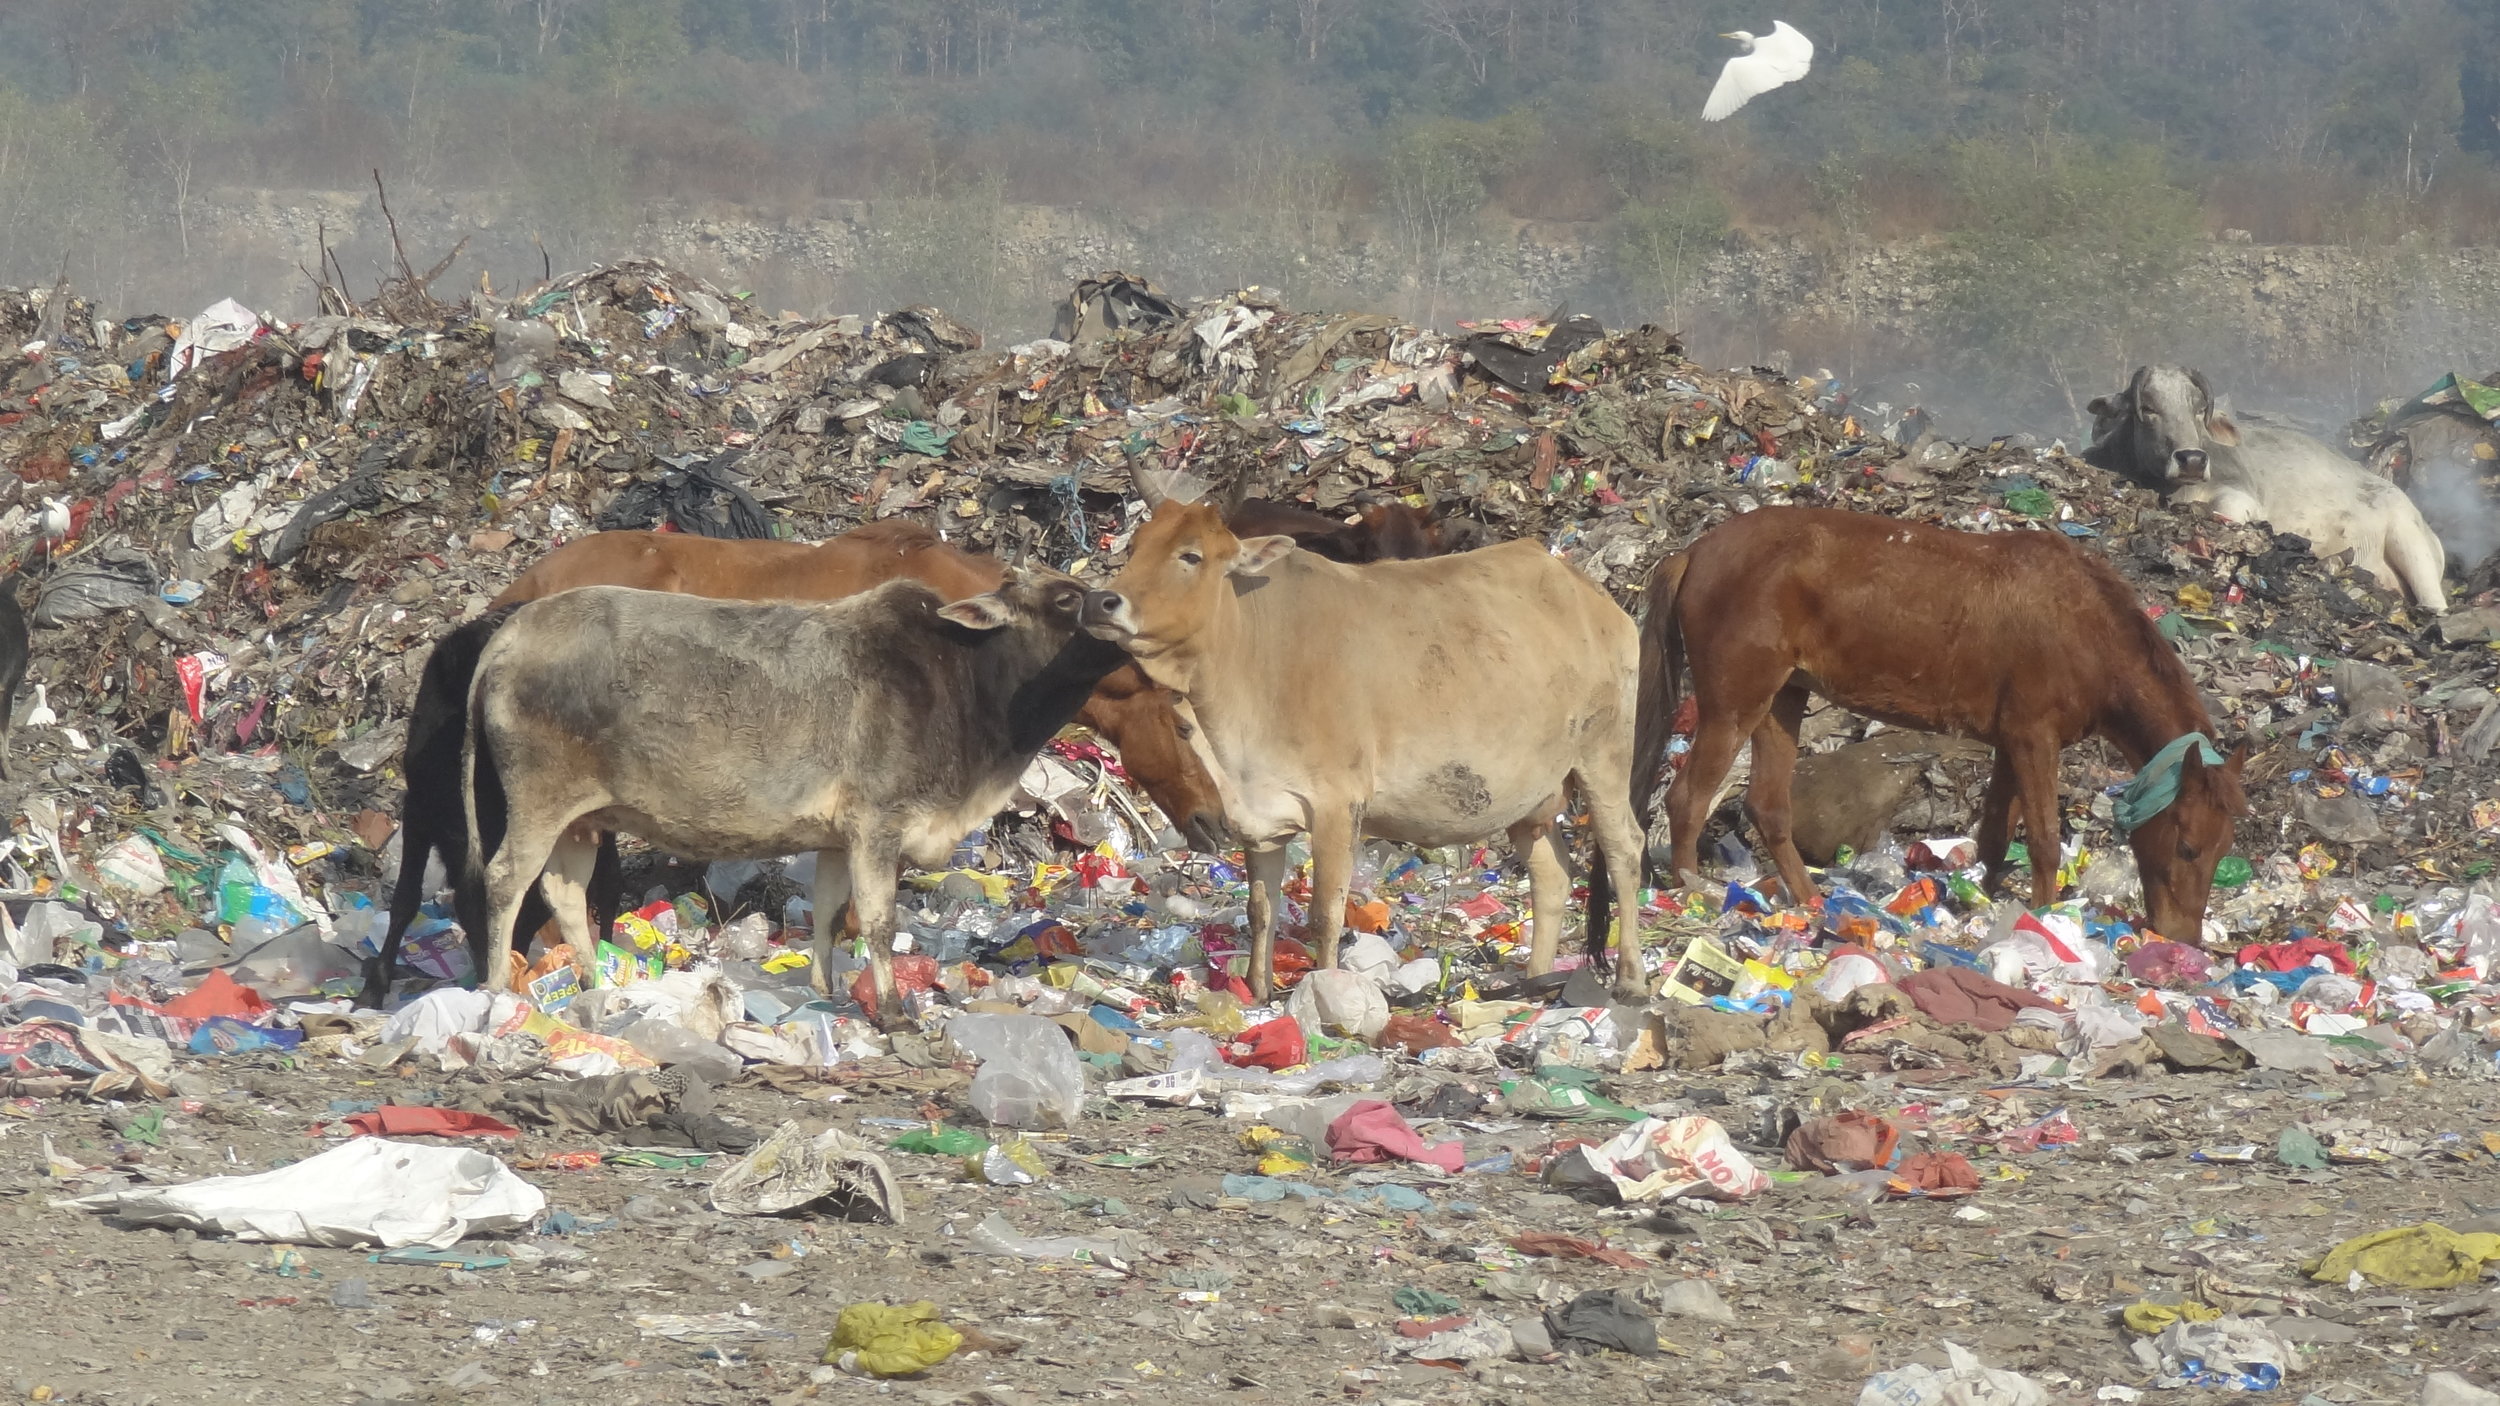 Cows feeding among (and on) plastic in a rural area of Uttarakhand.